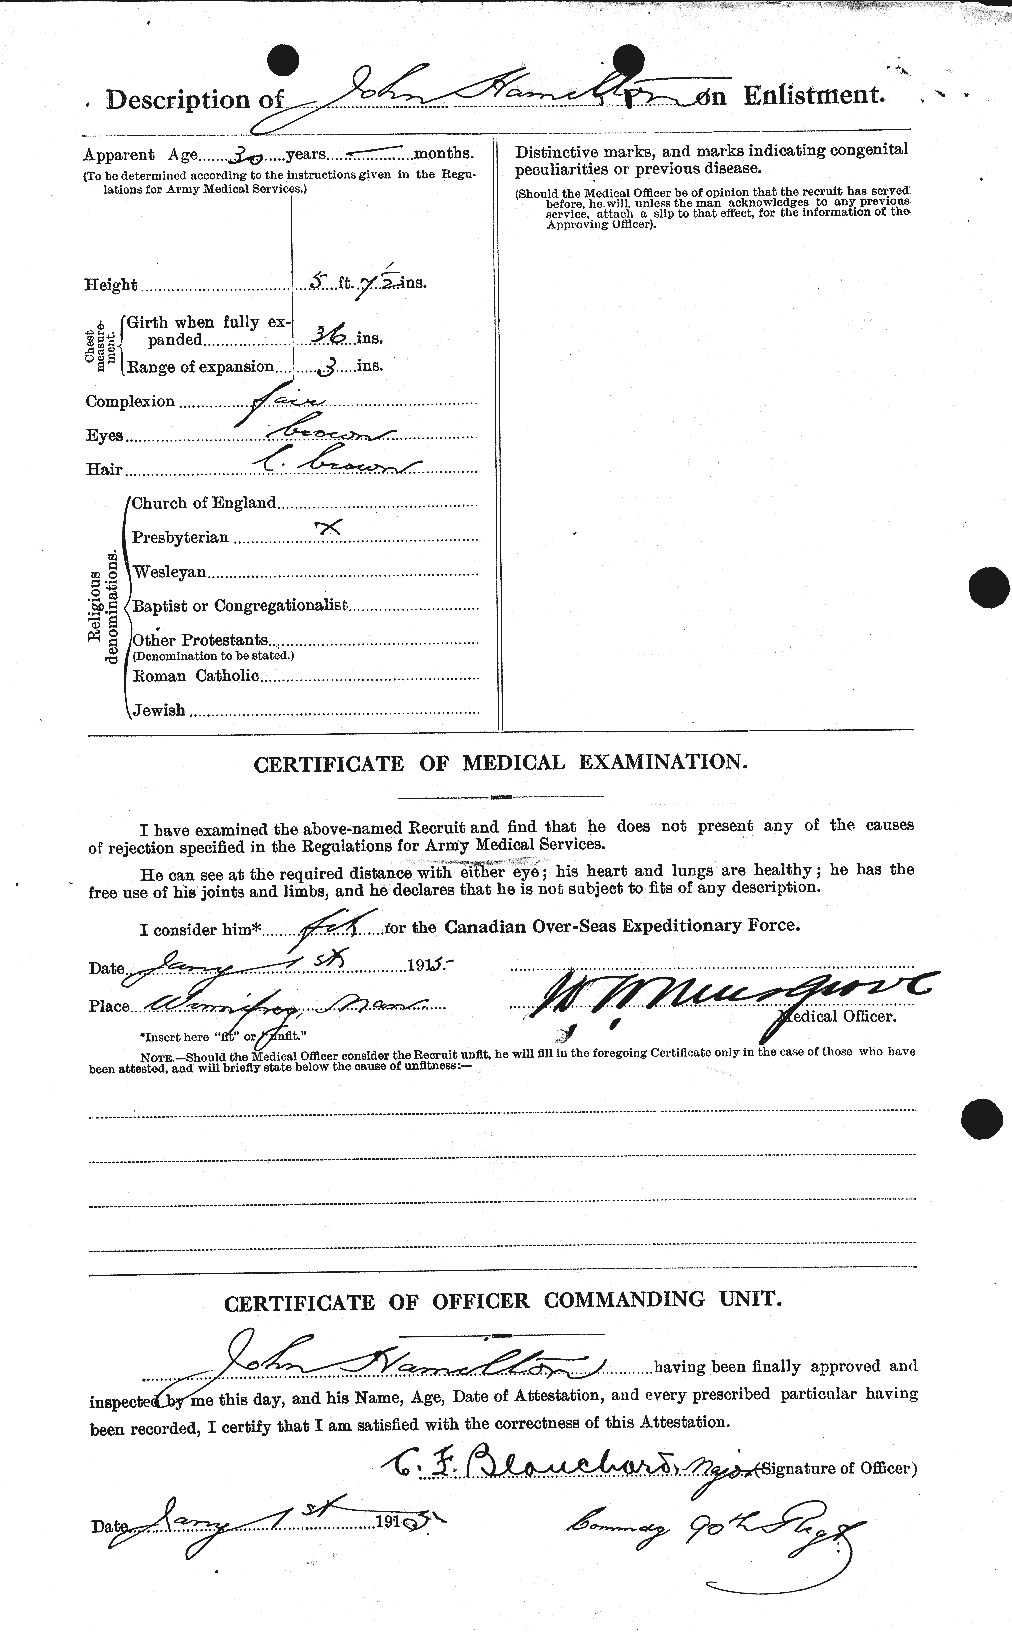 Personnel Records of the First World War - CEF 373037b